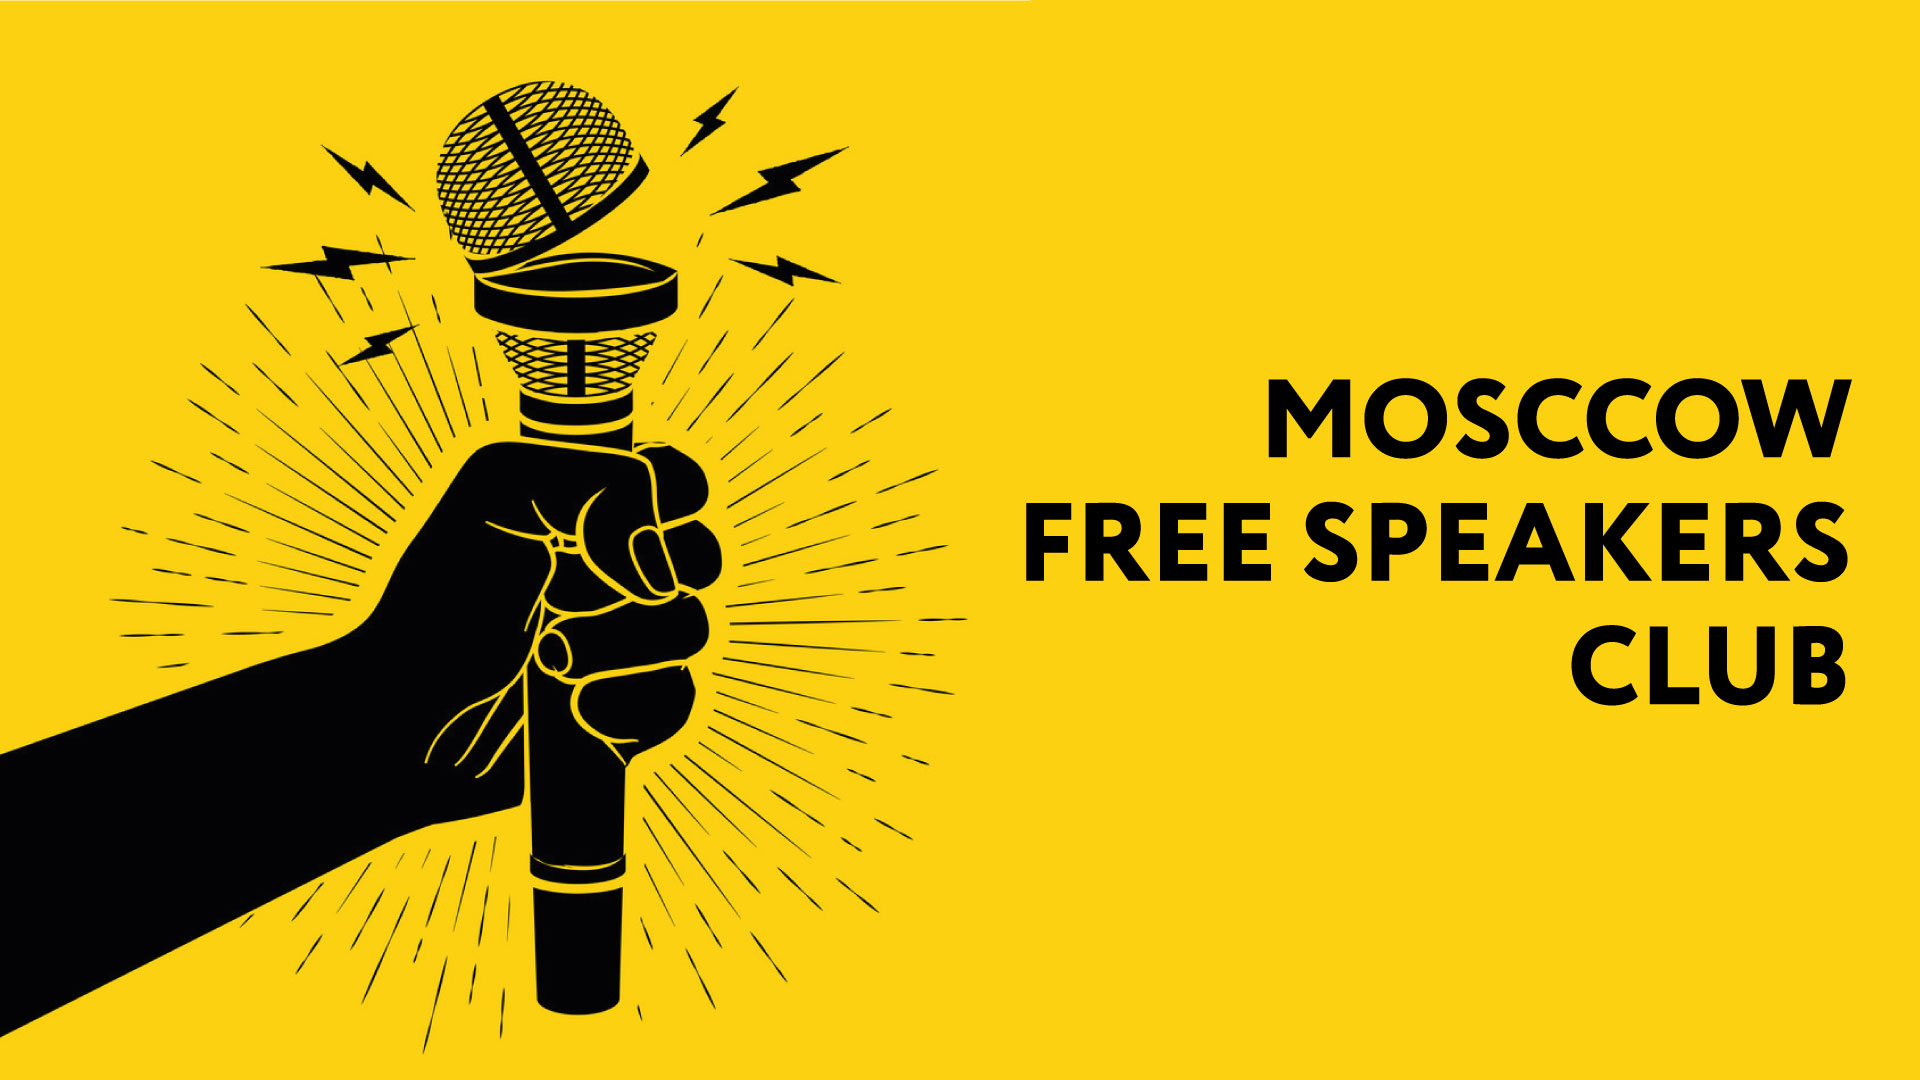 Moscow Free Speakers Club